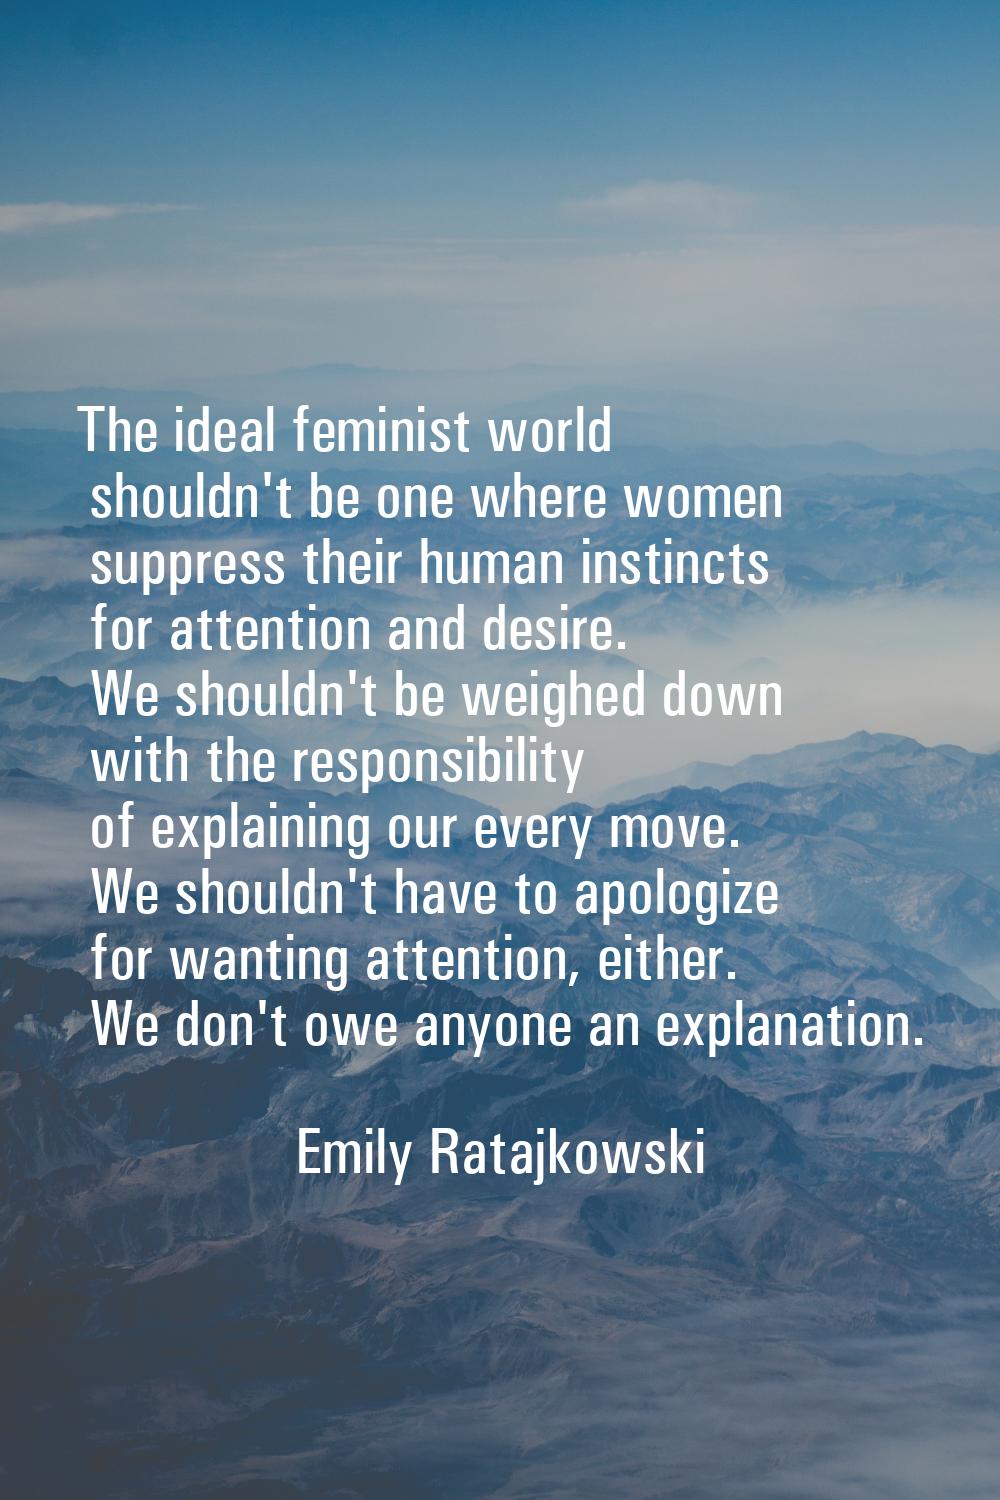 The ideal feminist world shouldn't be one where women suppress their human instincts for attention 